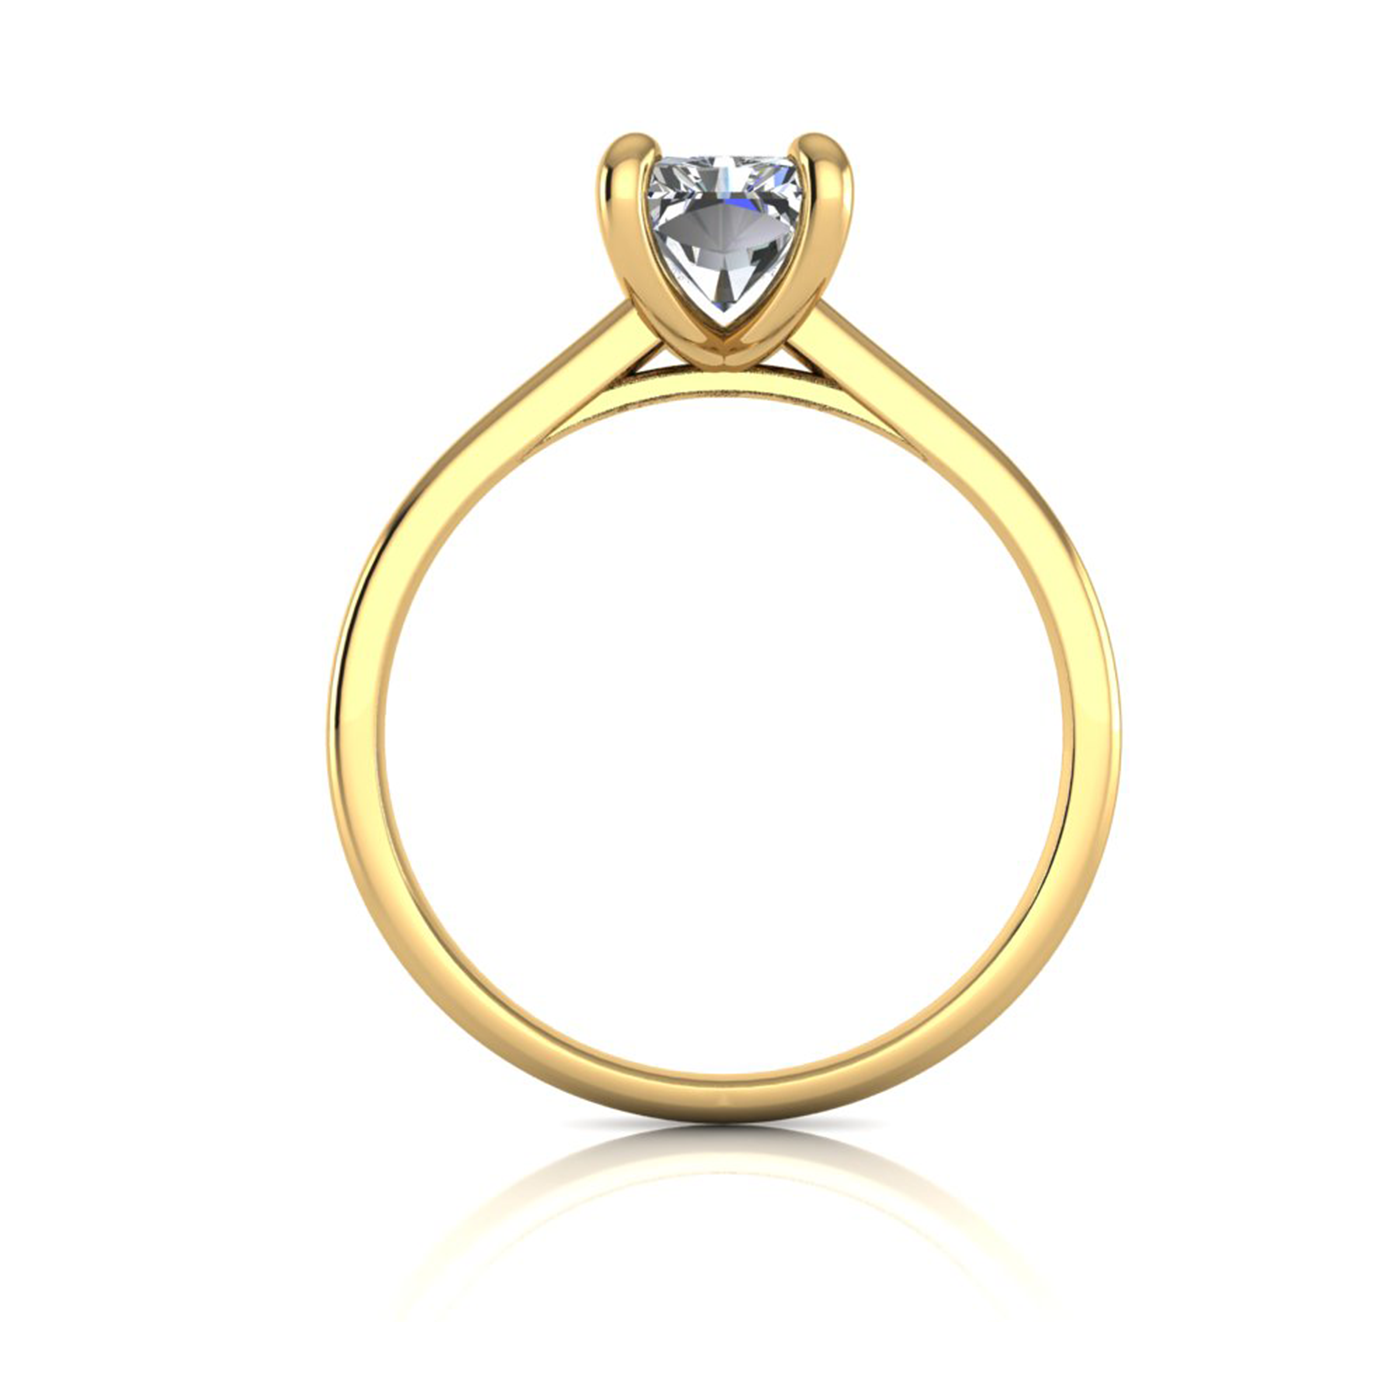 18k yellow gold  1,50 ct 4 prongs solitaire radiant cut diamond engagement ring with whisper thin band